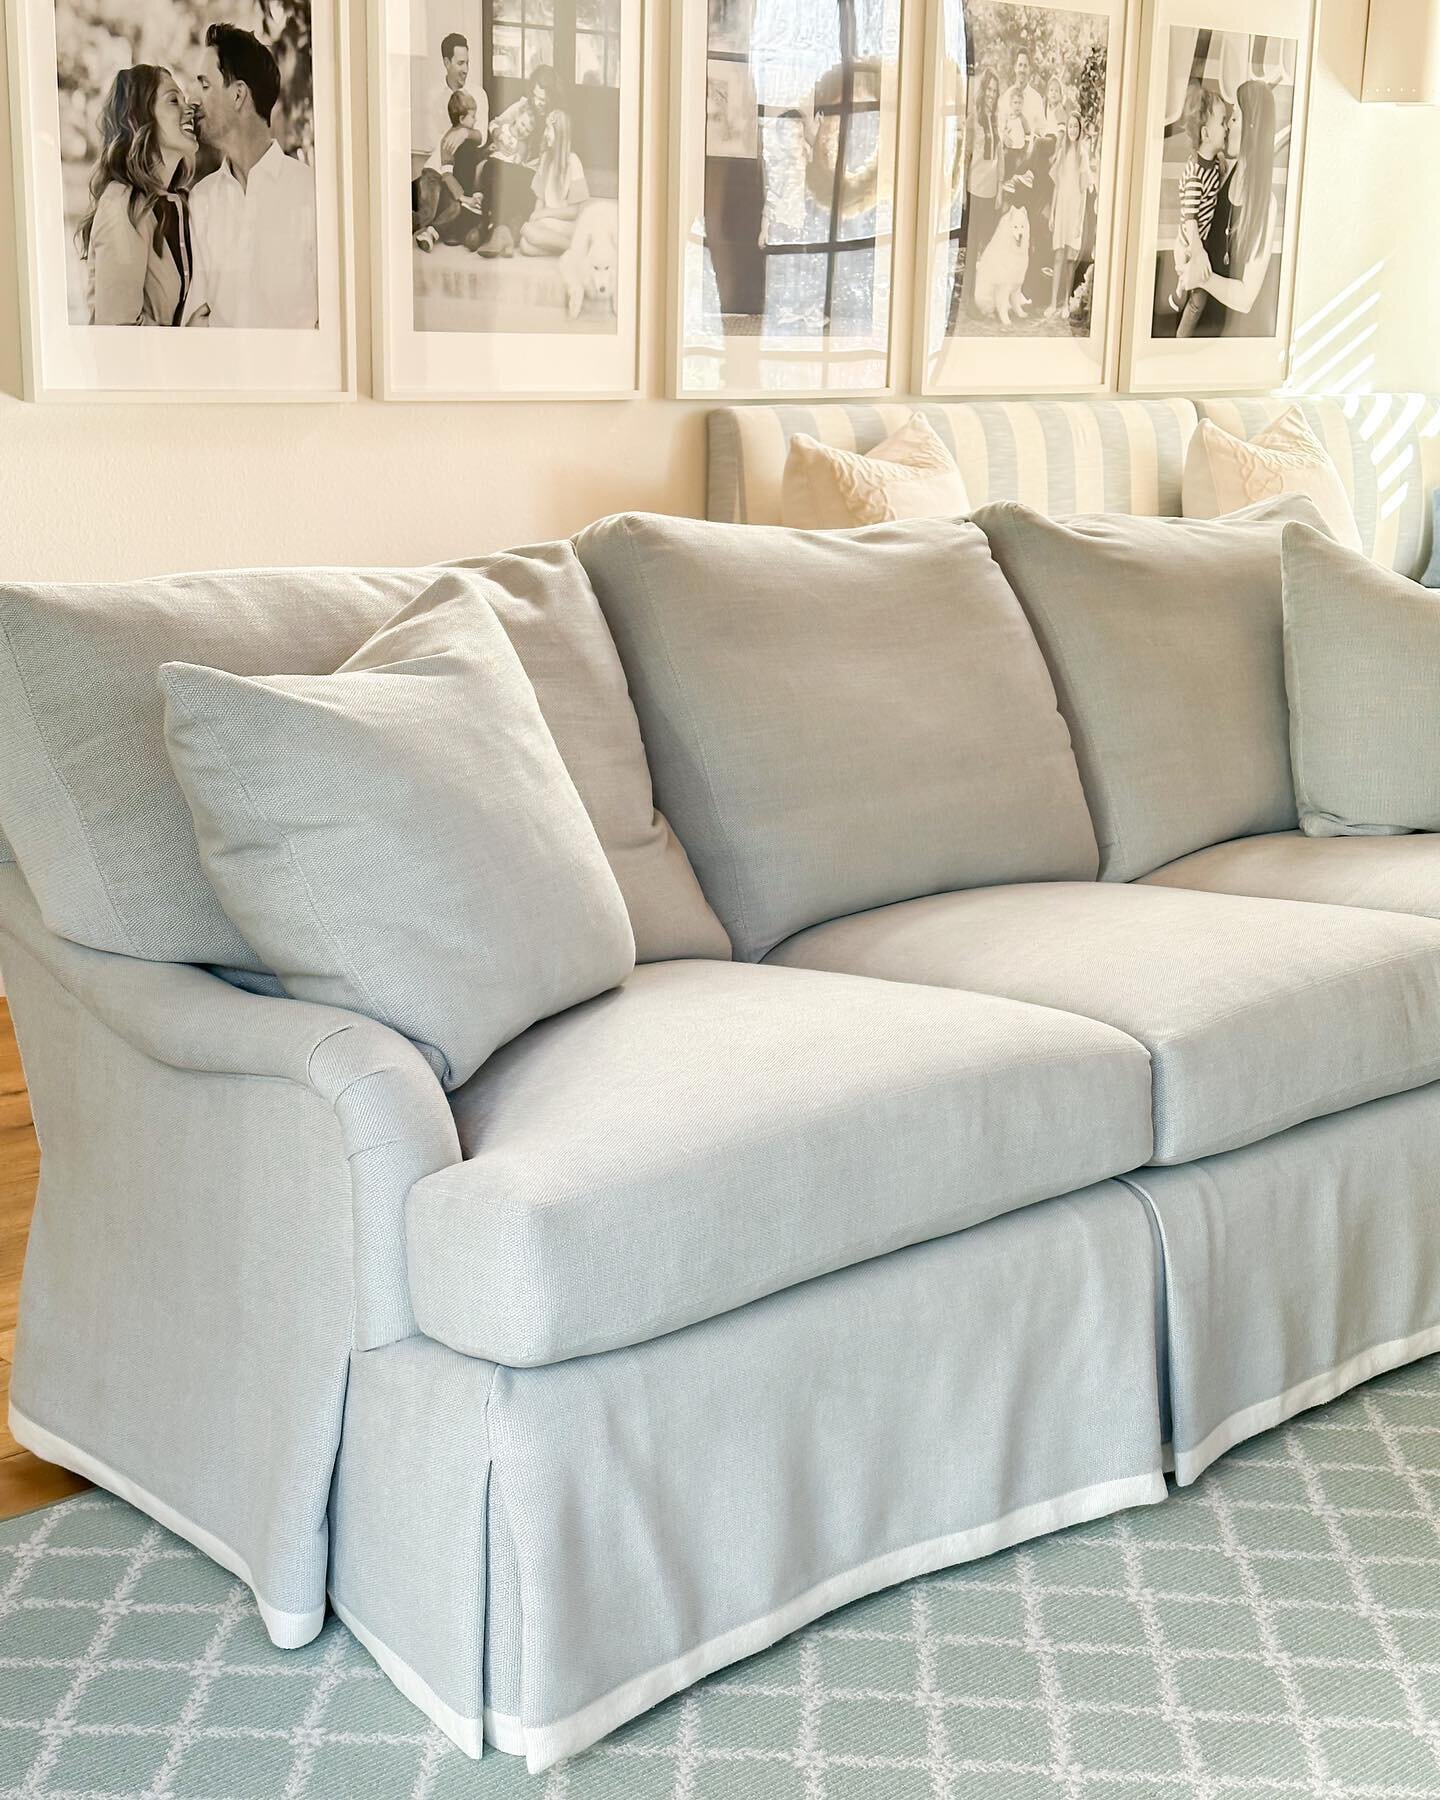 This couch is the perfect blend of traditional and casual. @nantuckethome helped me create a haven for family memories, laughter, and love.